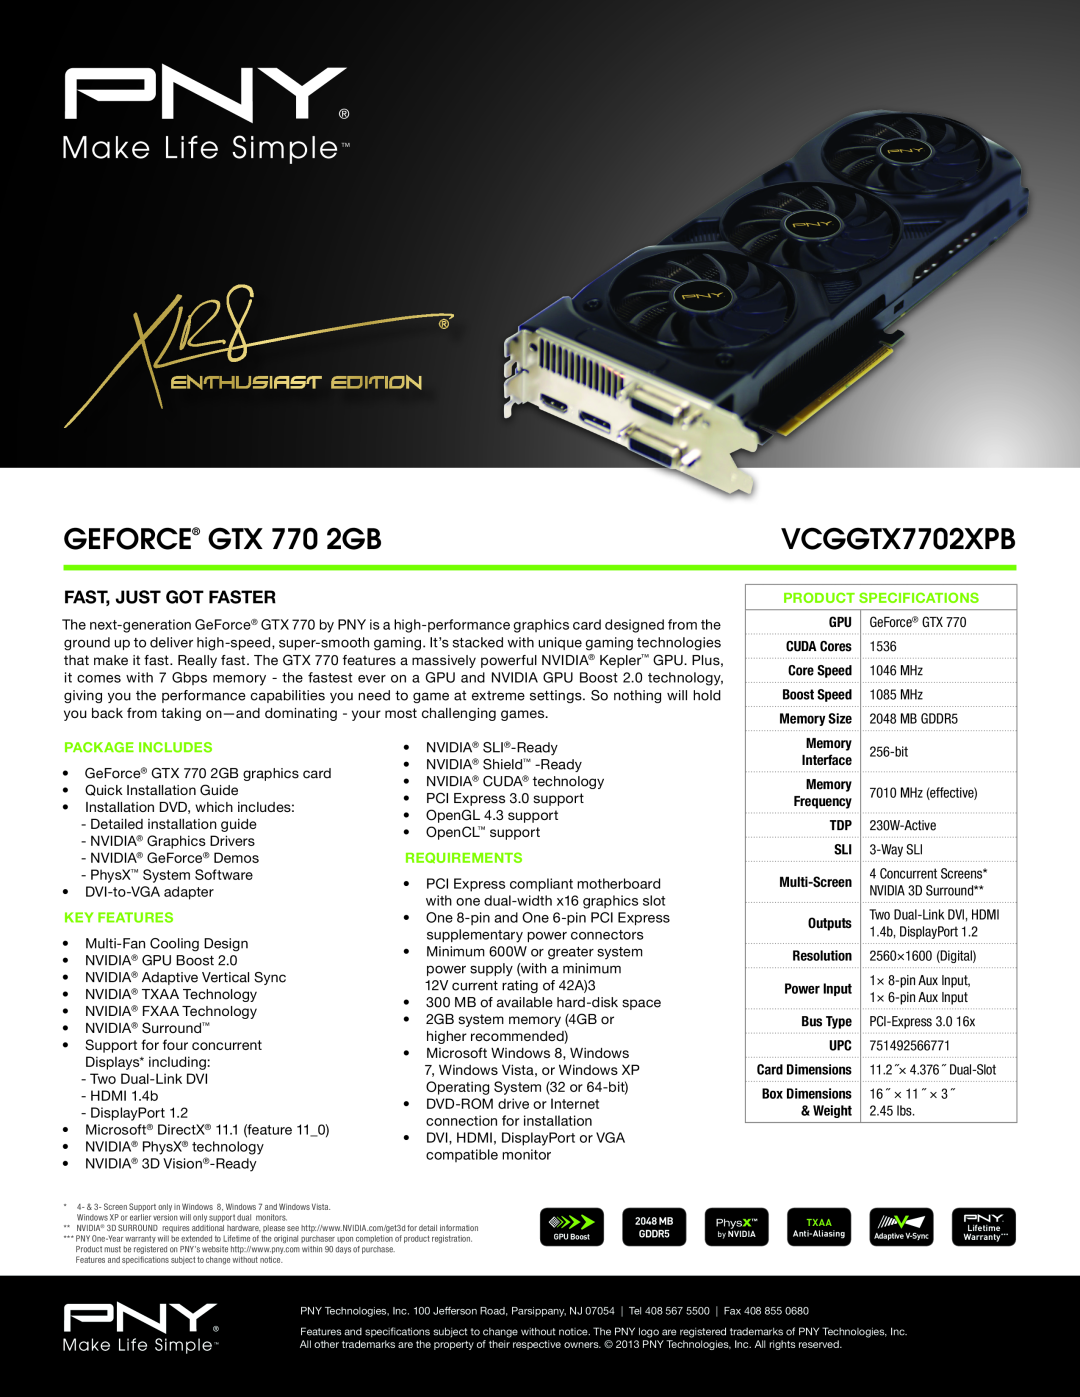 PNY VCGGTX7702XPB specifications GEFORCE GTX 770 2GB, Fast, Just Got Faster, Product Specifications, Package Includes 